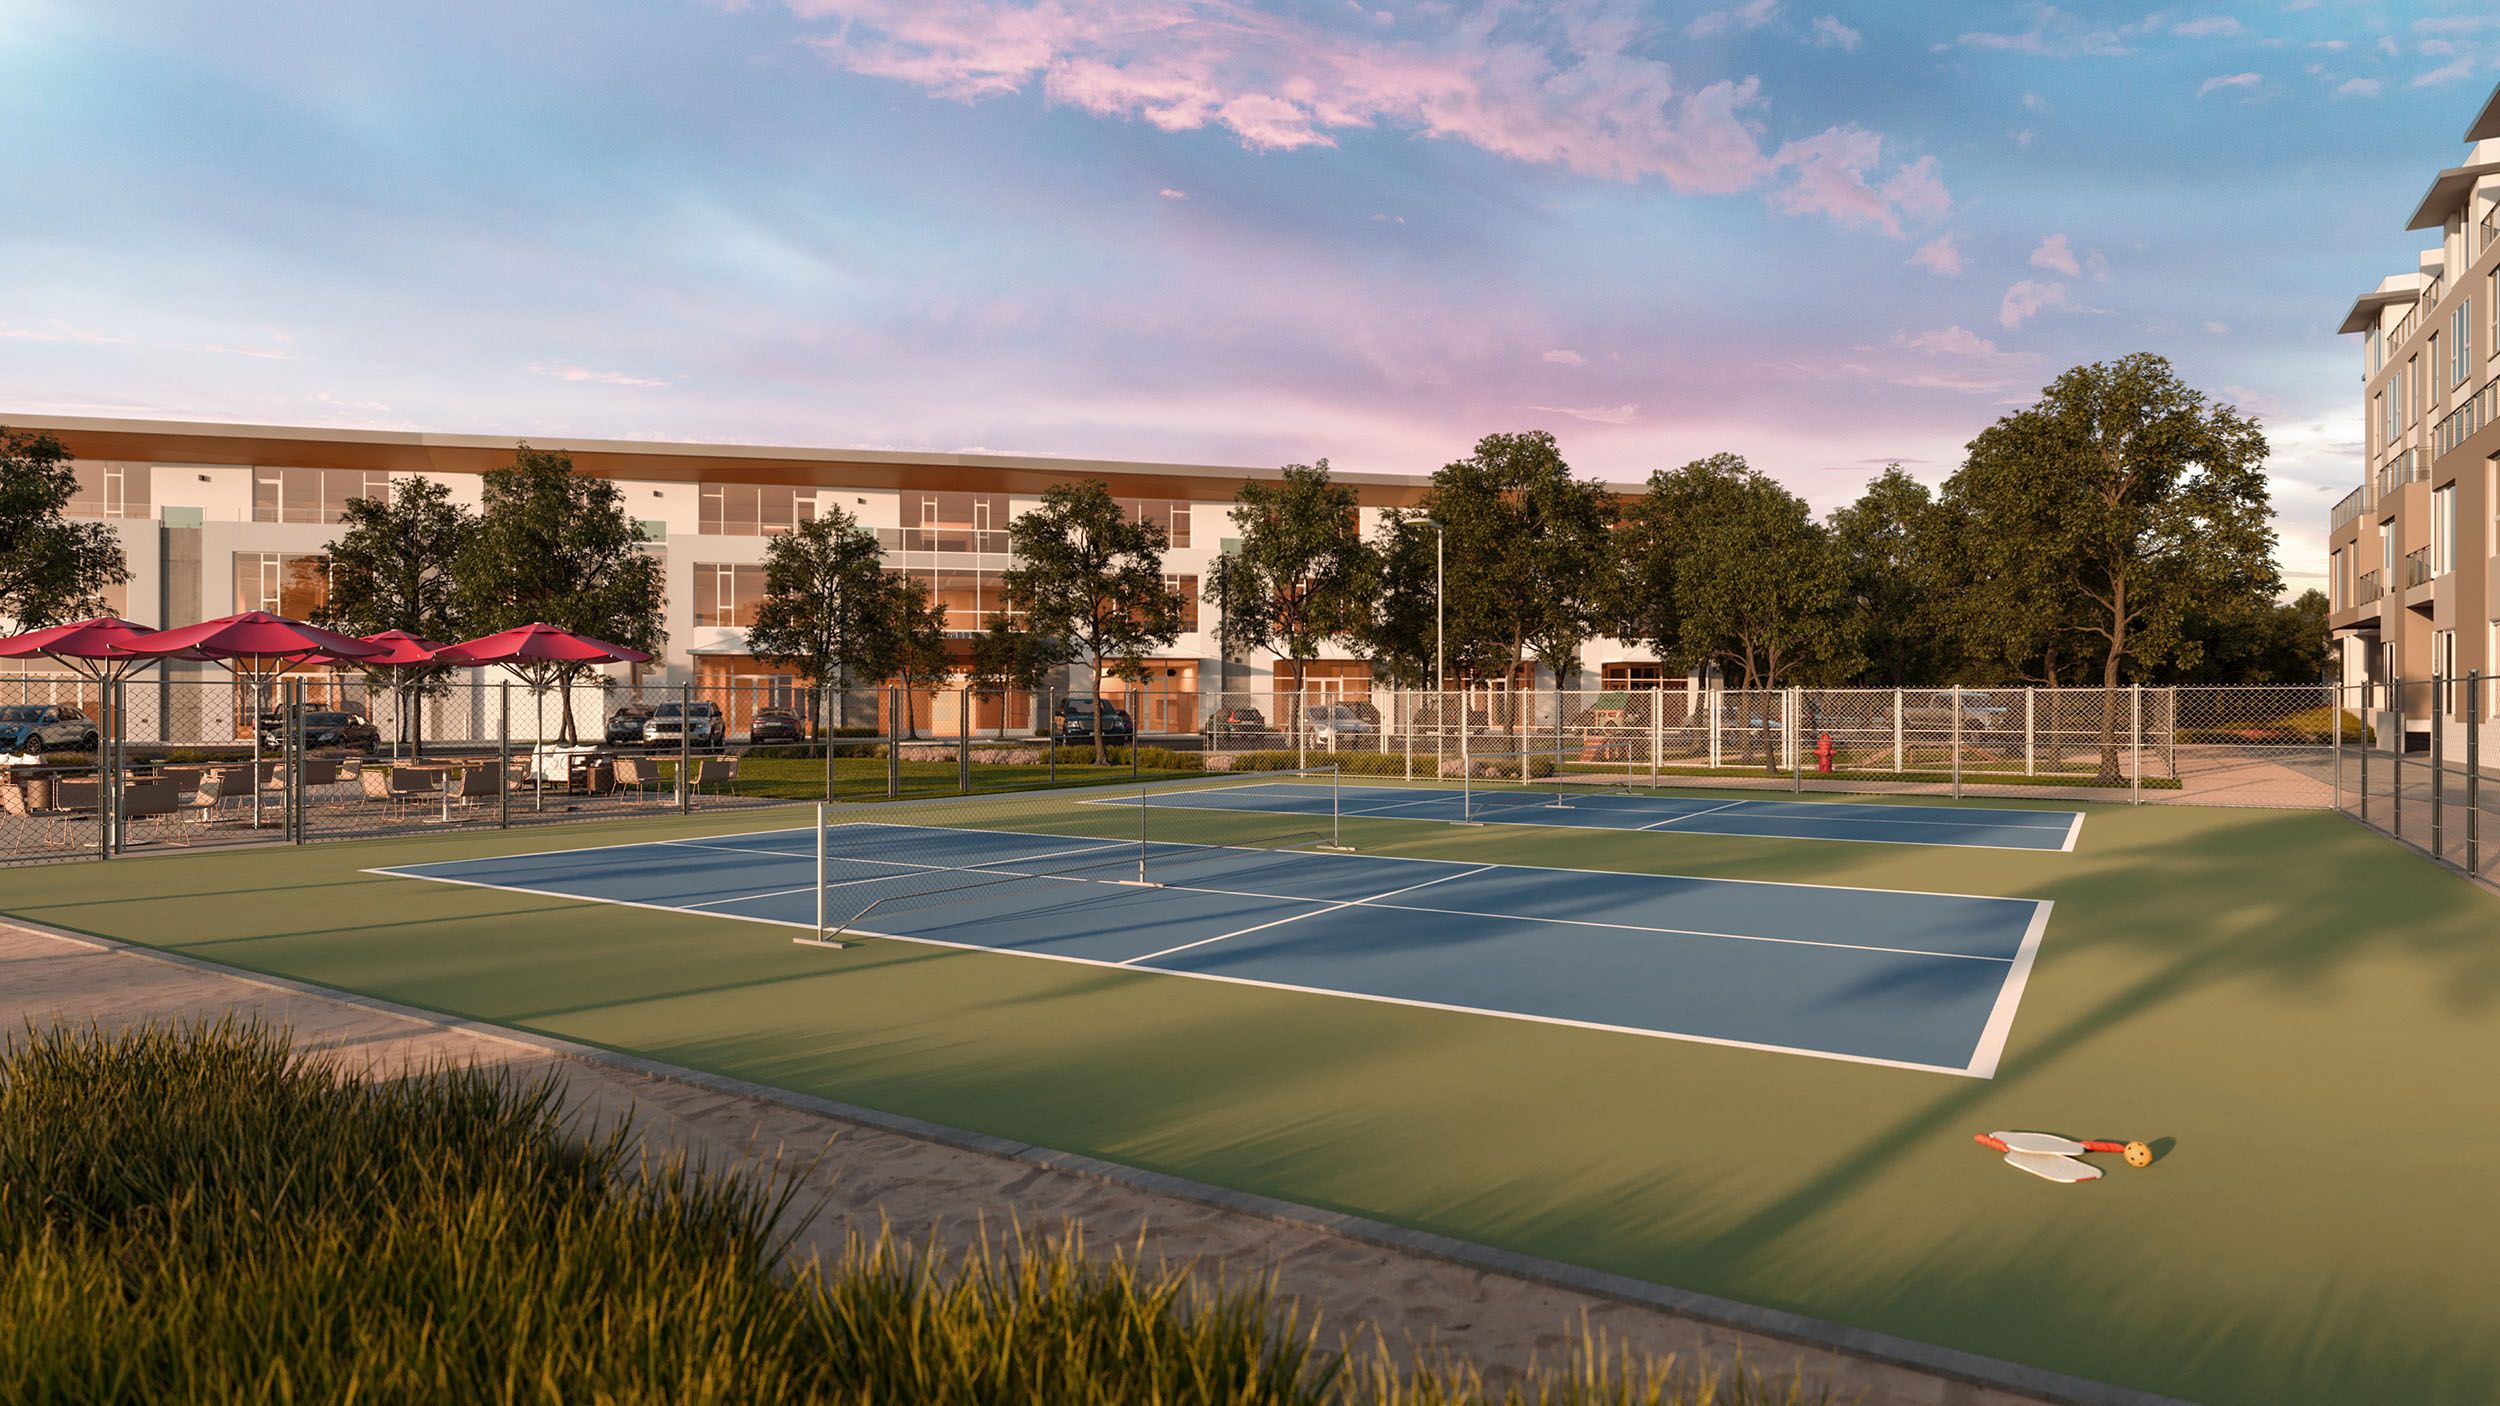 Pickleball courts in late afternoon sun